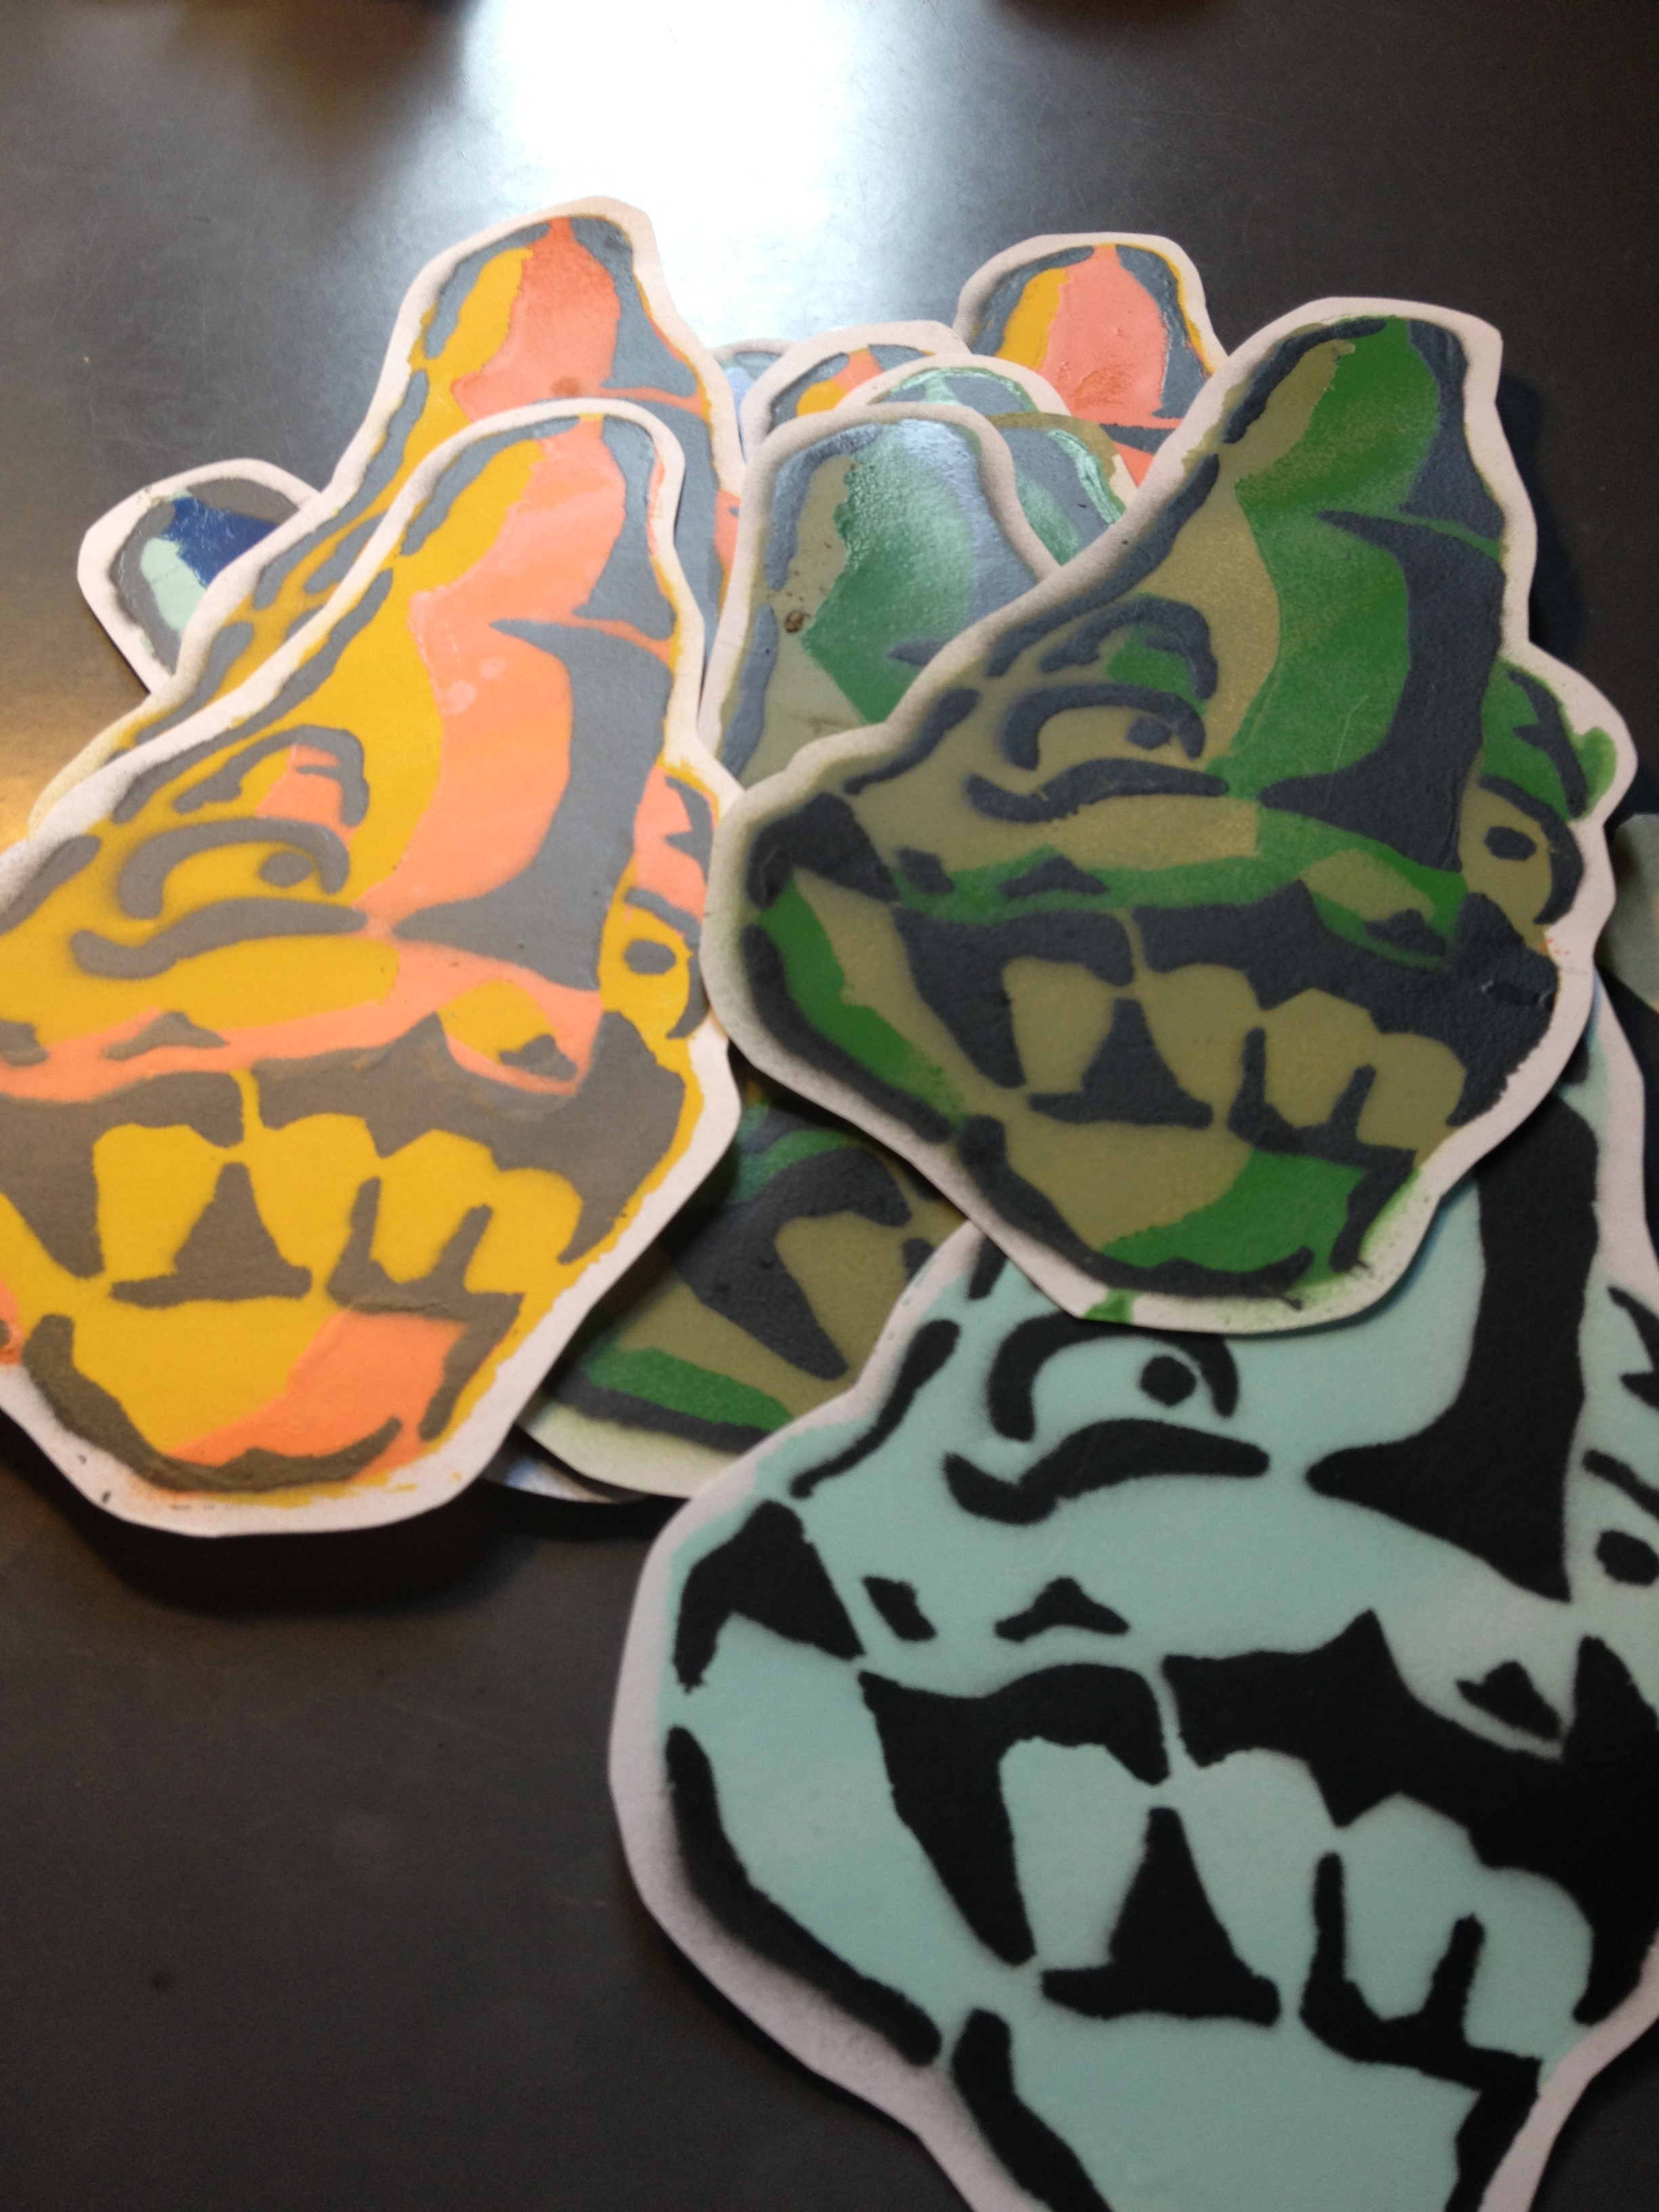 Stenciled stickers